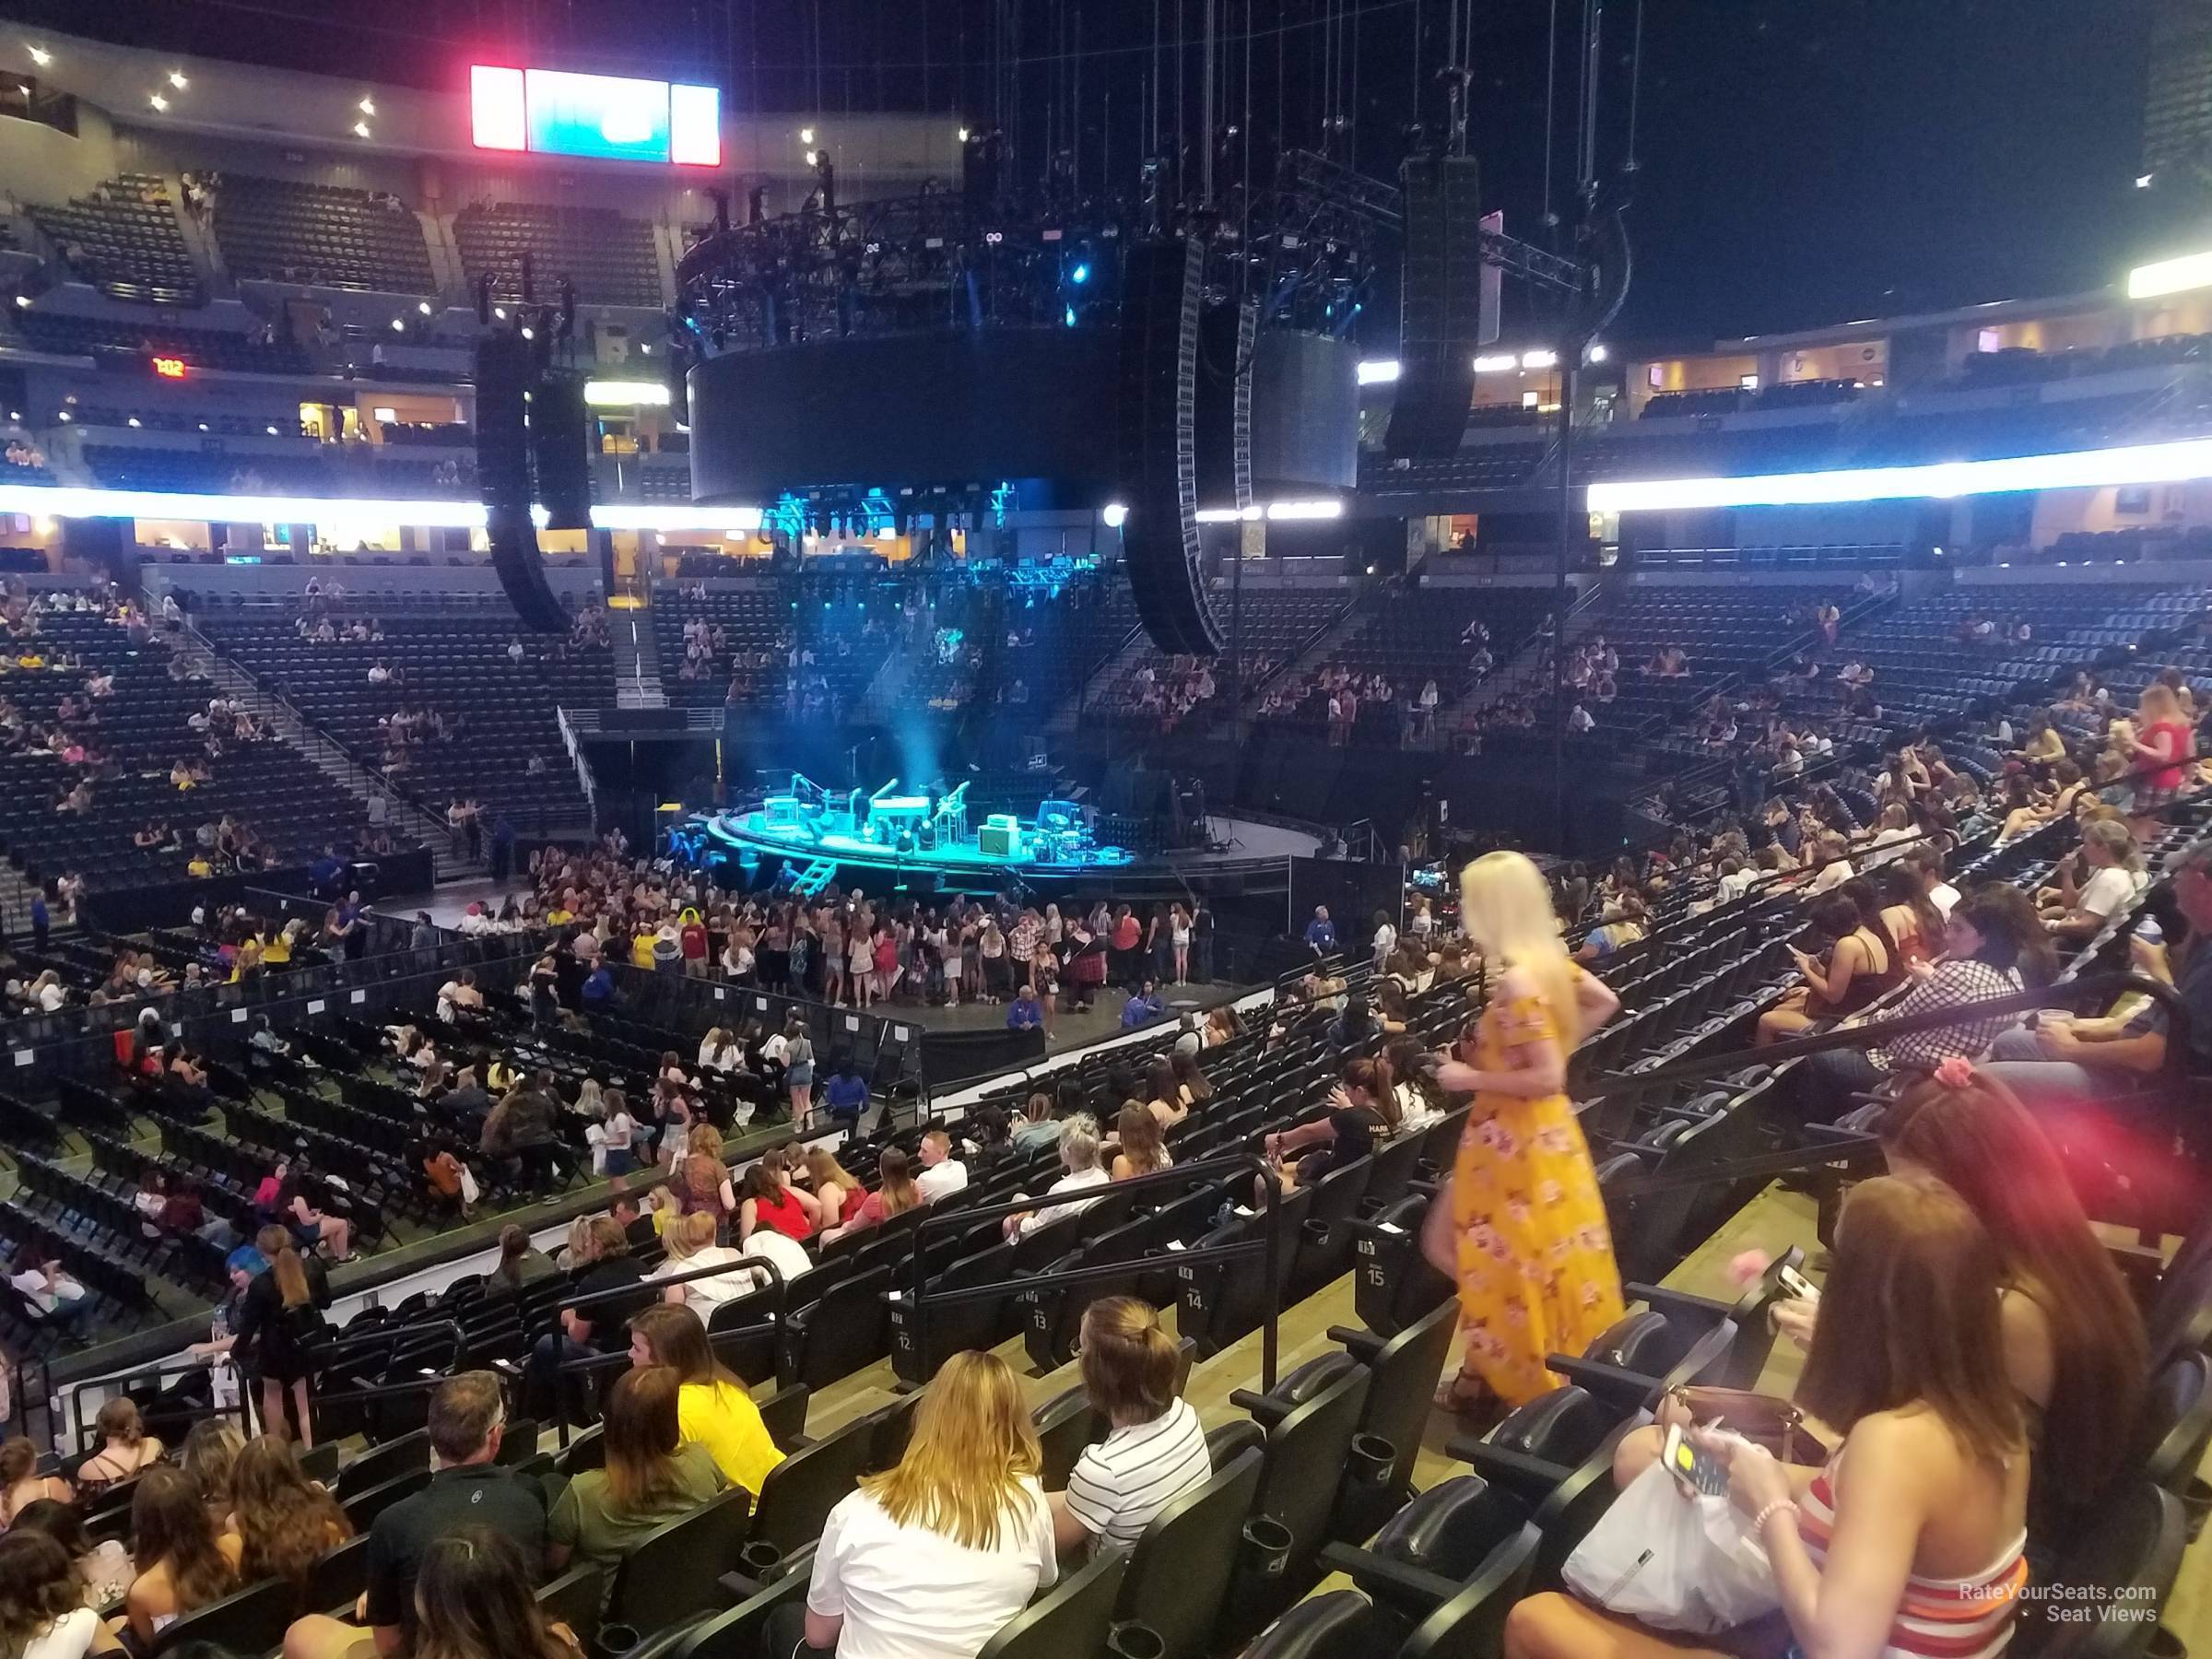 section 102, row 19 seat view  for concert - ball arena